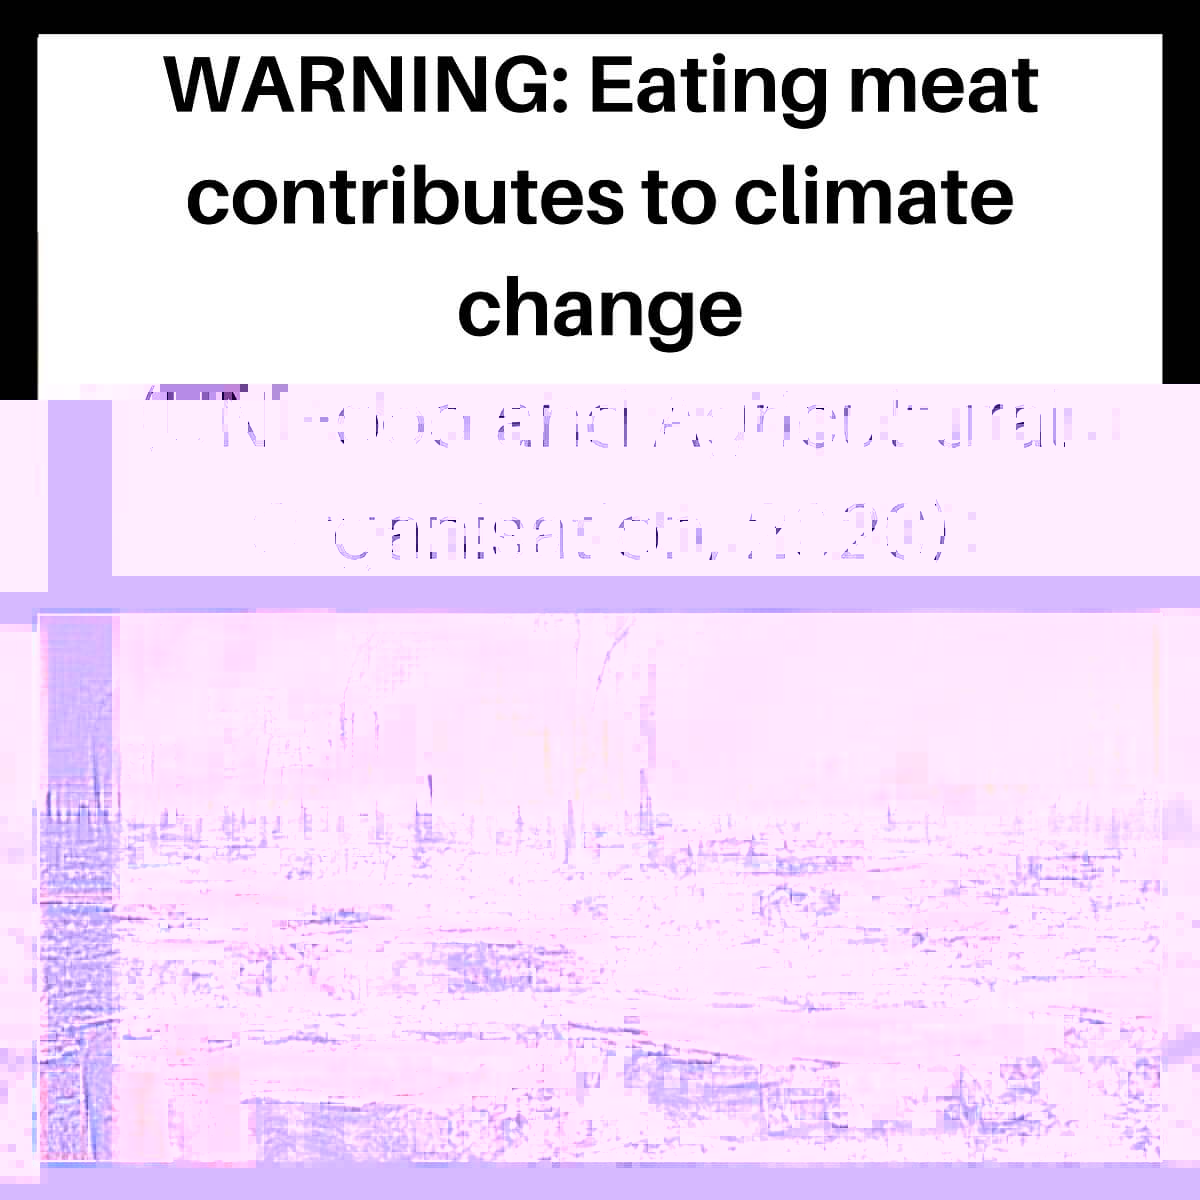 The climate warning label showing an image of a deforested area with factory smoke in the distance and the warning text - WARNING: Eating meat contributes to climate change (UN Food and Agricultural Organisation, 2020).